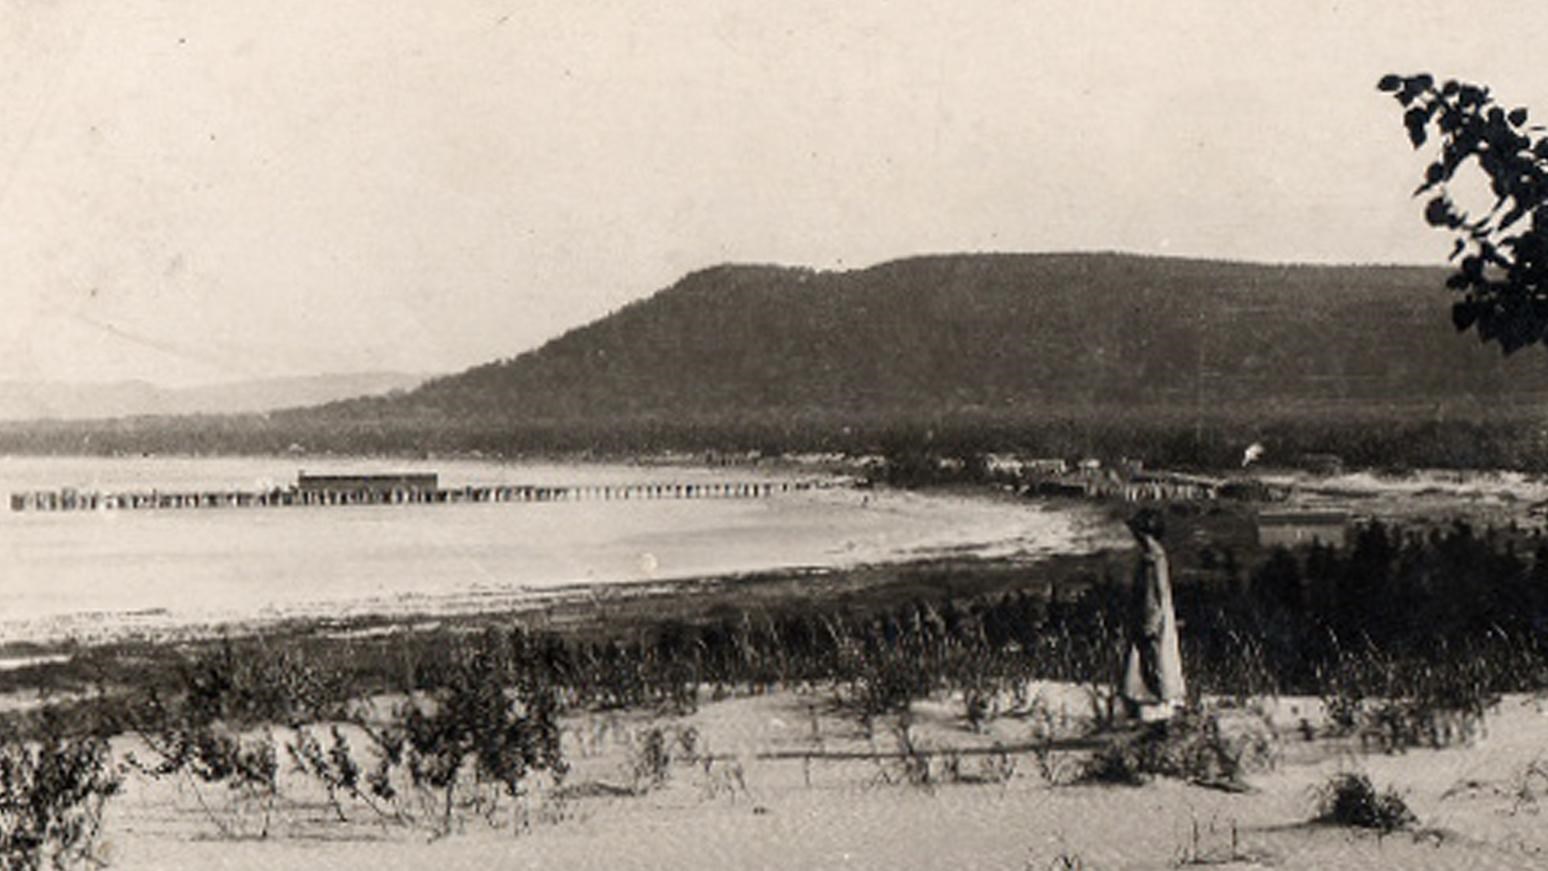 Historic photo of wooden dock and piers reaching from the beach out into a large bay